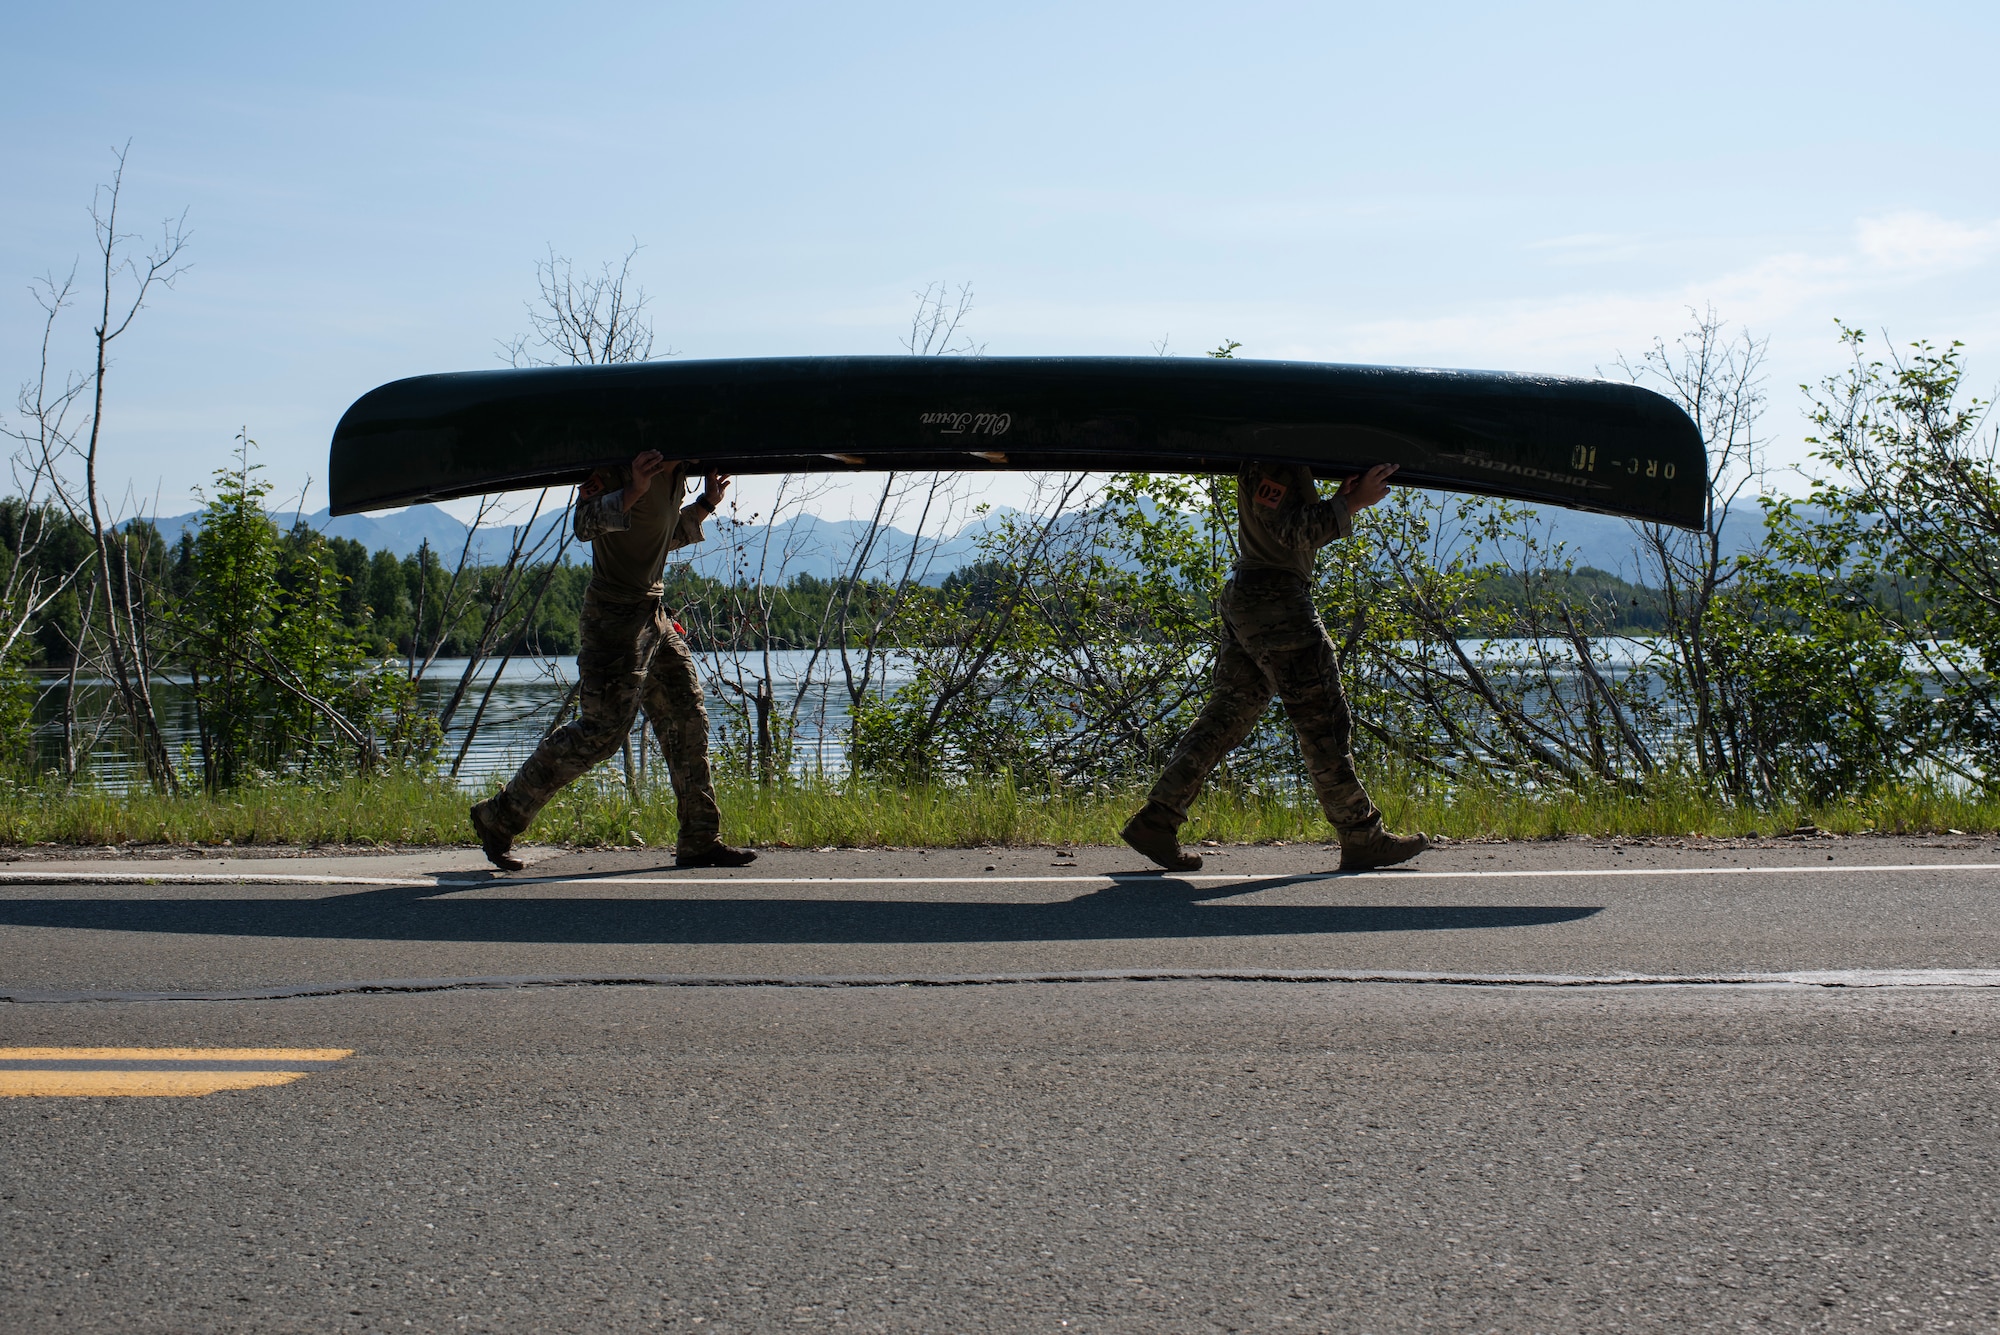 U.S. Air Force Staff Sgt. Jacob Lara, left, and Senior Airman Matthew Arellano, tactical air control party (TACP) specialists, 25th Air Support Operations Squadron, carry their canoe while competing in the Chaos Challenge 2021 at Joint Base Elmendorf-Richardson, Alaska, July 15, 2021. The Chaos Challenge 2021 was a multi-day series of mental and physical contests sponsored by the 1st Air Support Operations Group with participants from the 3rd, 5th, 25th, and 604th Air Support Operations Squadrons and a guest team from the 673d Security Forces Squadron. The winner of the competition will go on to compete in Lightning Challenge 2021 to determine the best two-man TACP team in the Air Force.